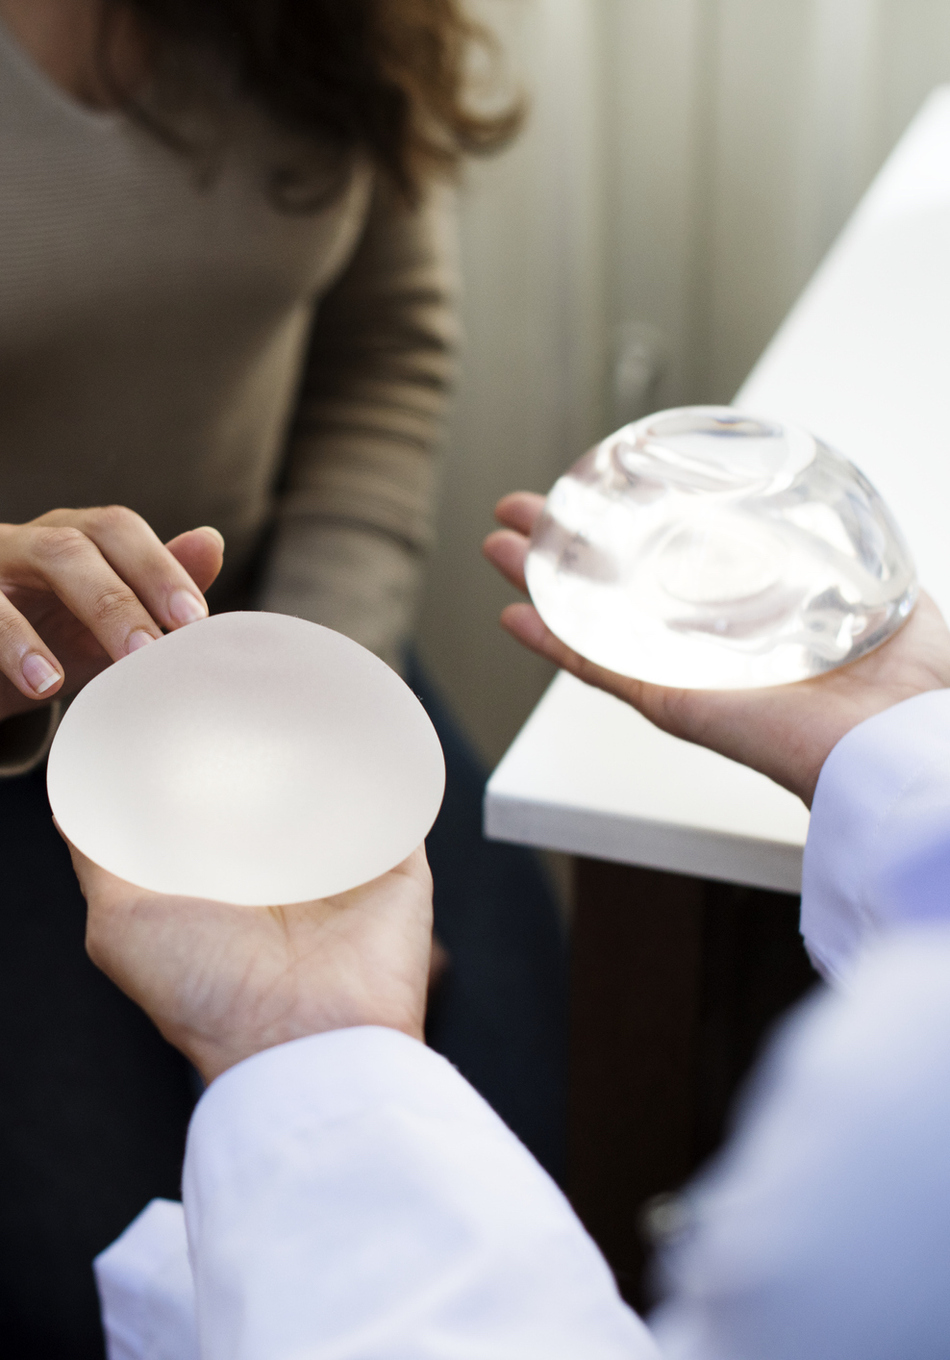 Do Women With Breast Implants Have a Higher Risk of Cancer?